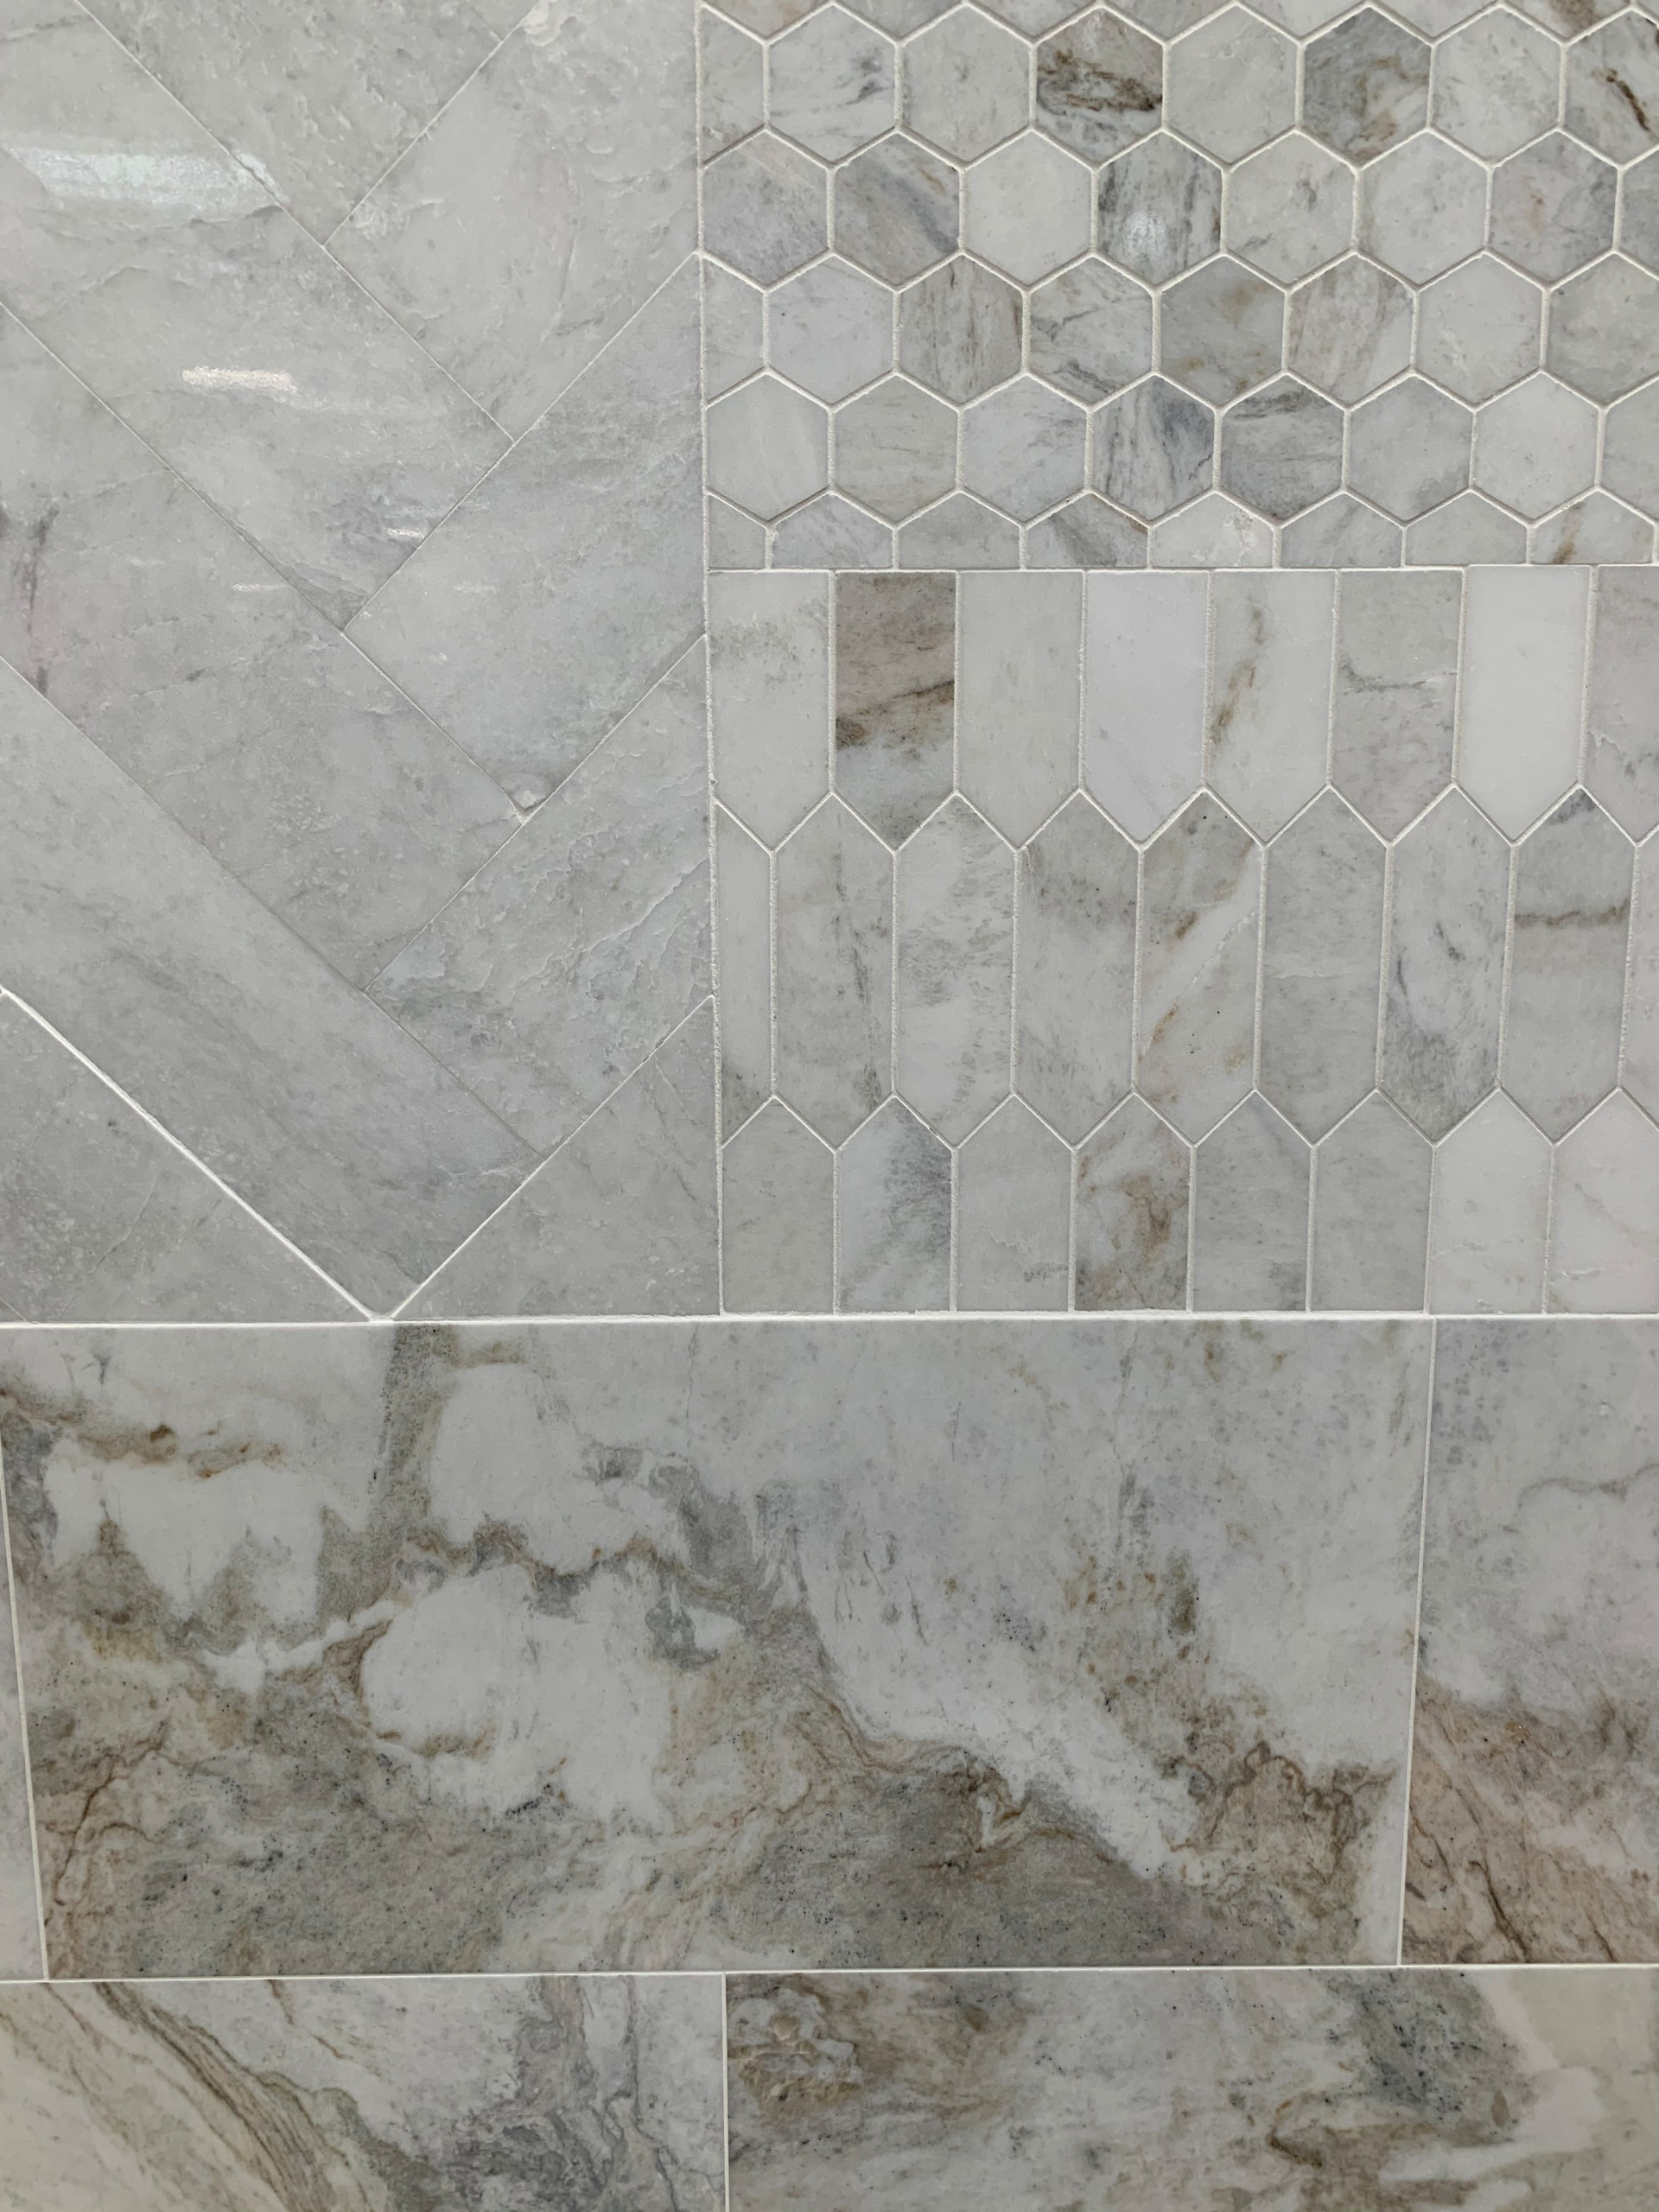 FOUR TILE PATTERNS THAT COMBINE BEAUTIFULLY IN A BATHROOM